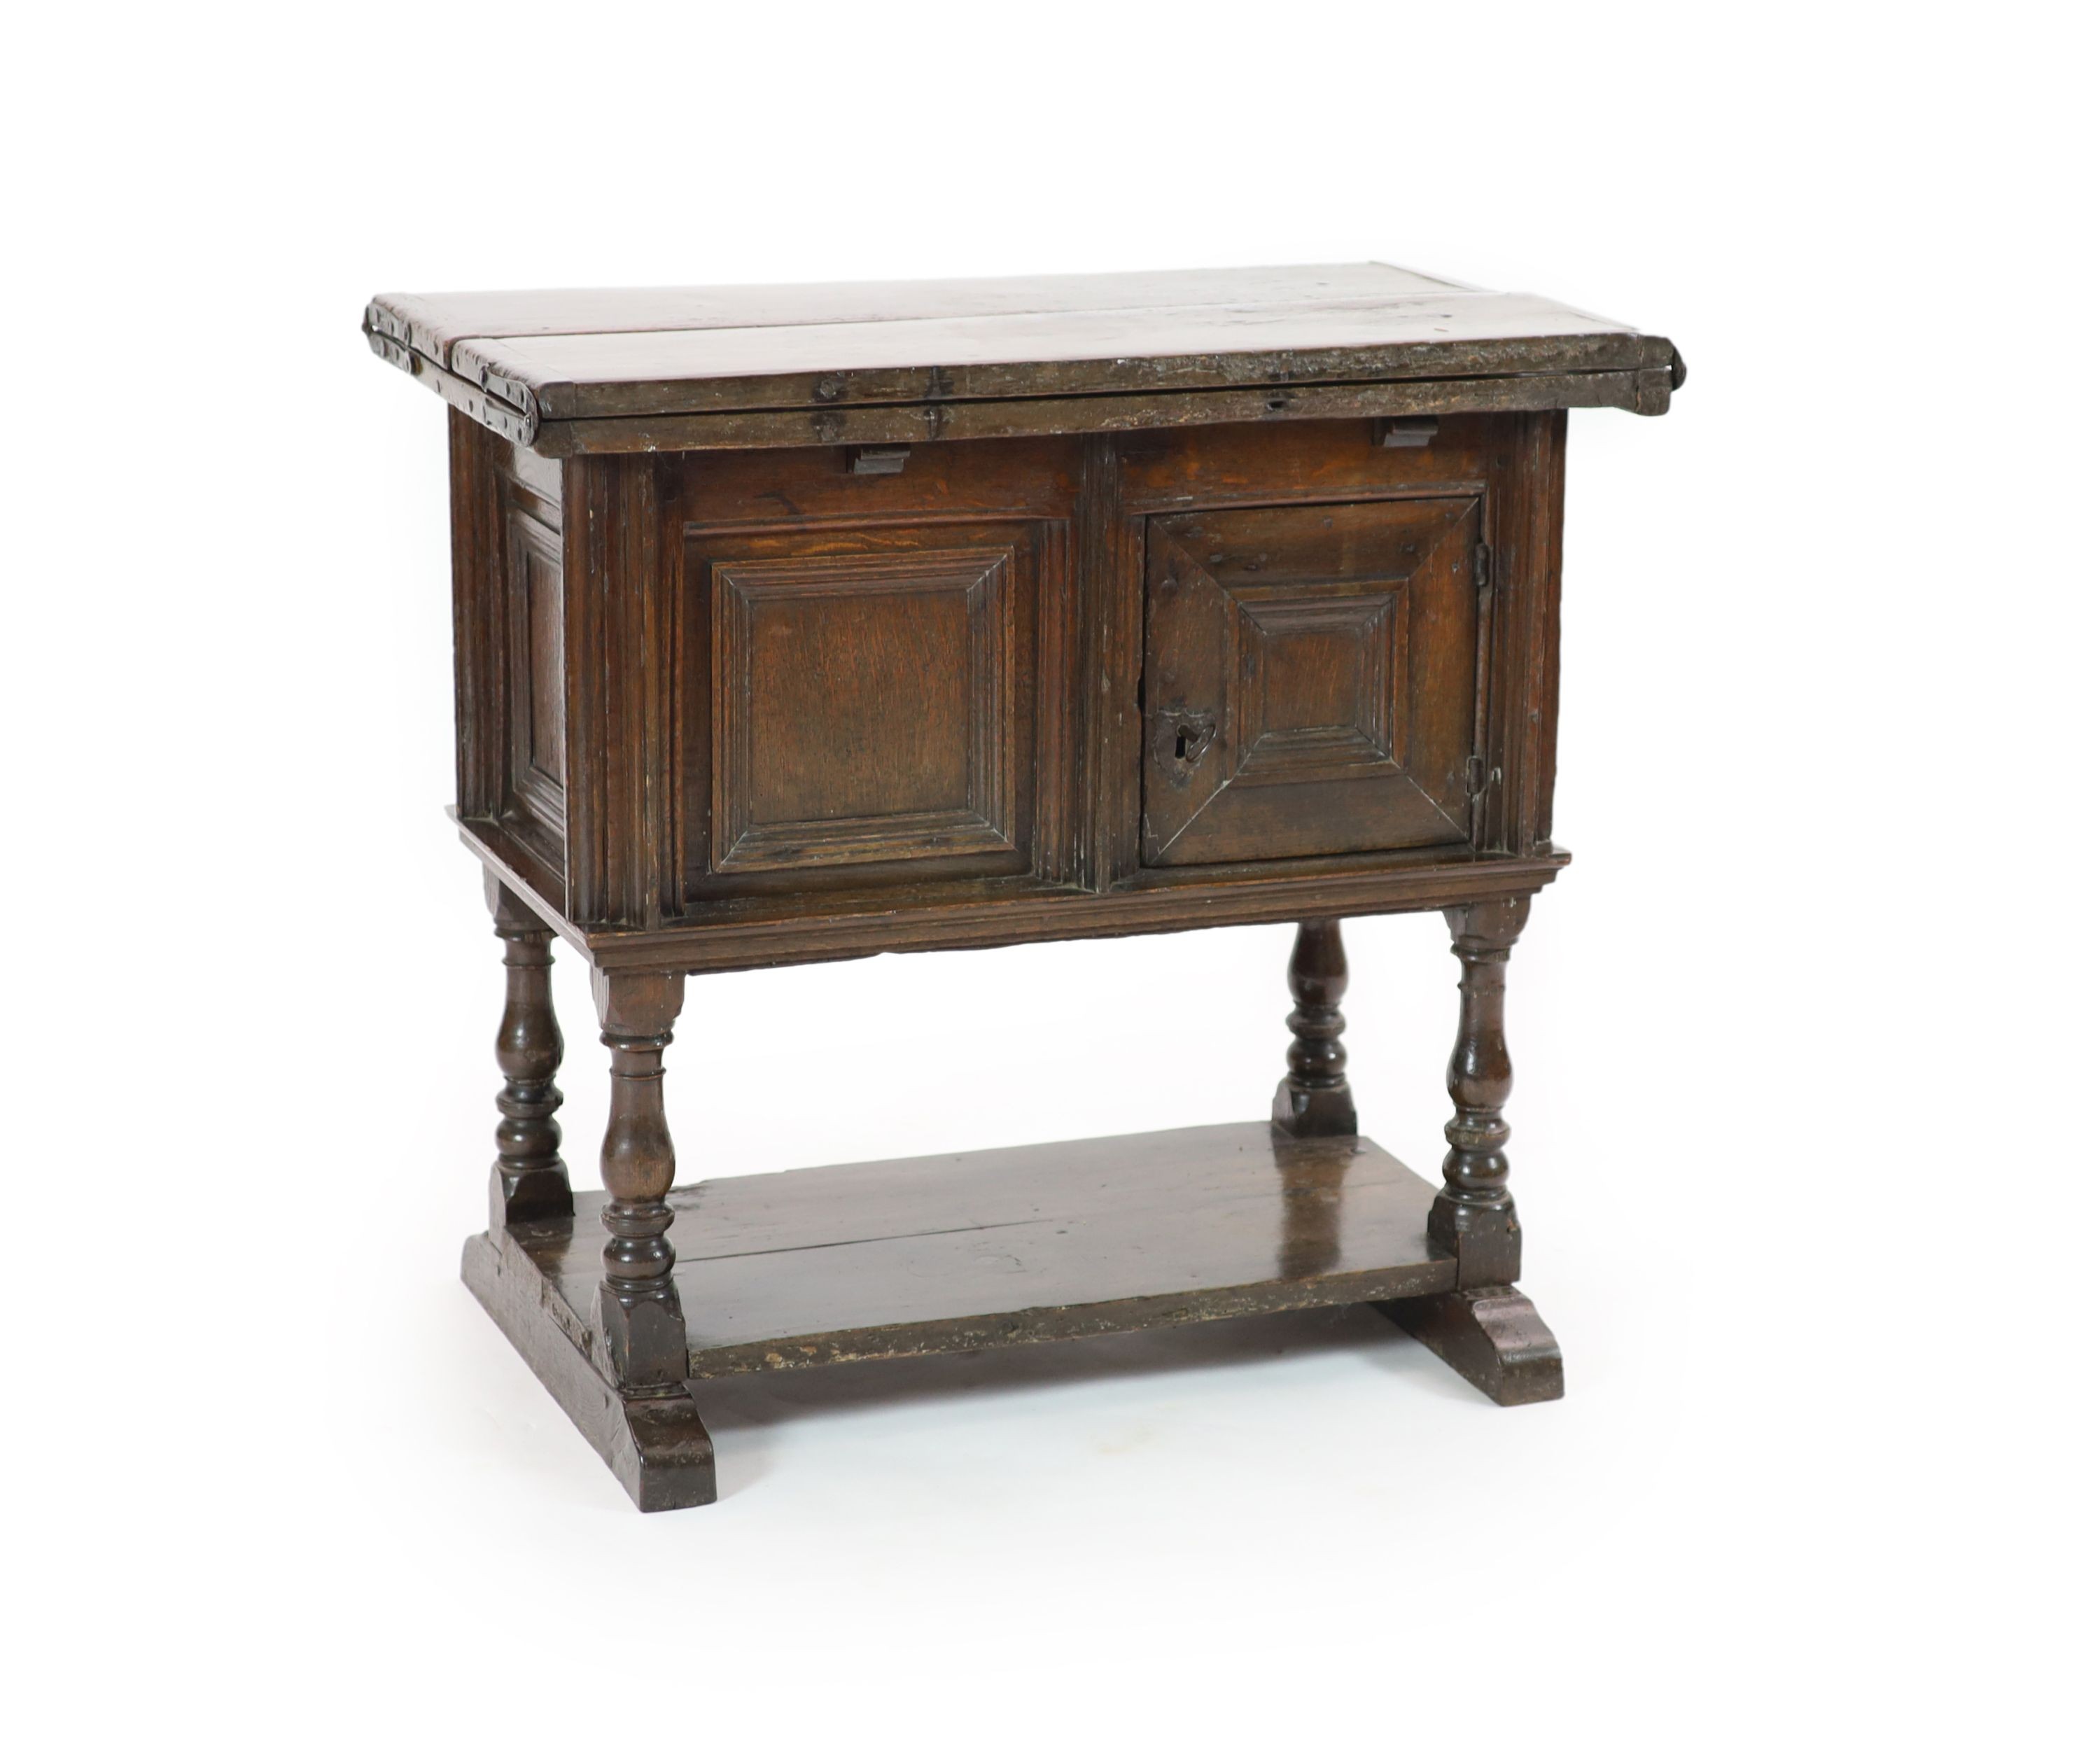 A 17th century rectangular oak drop-flap games table, fitted cupboard and undertier H 79cm. W 83cm. D 47cm.